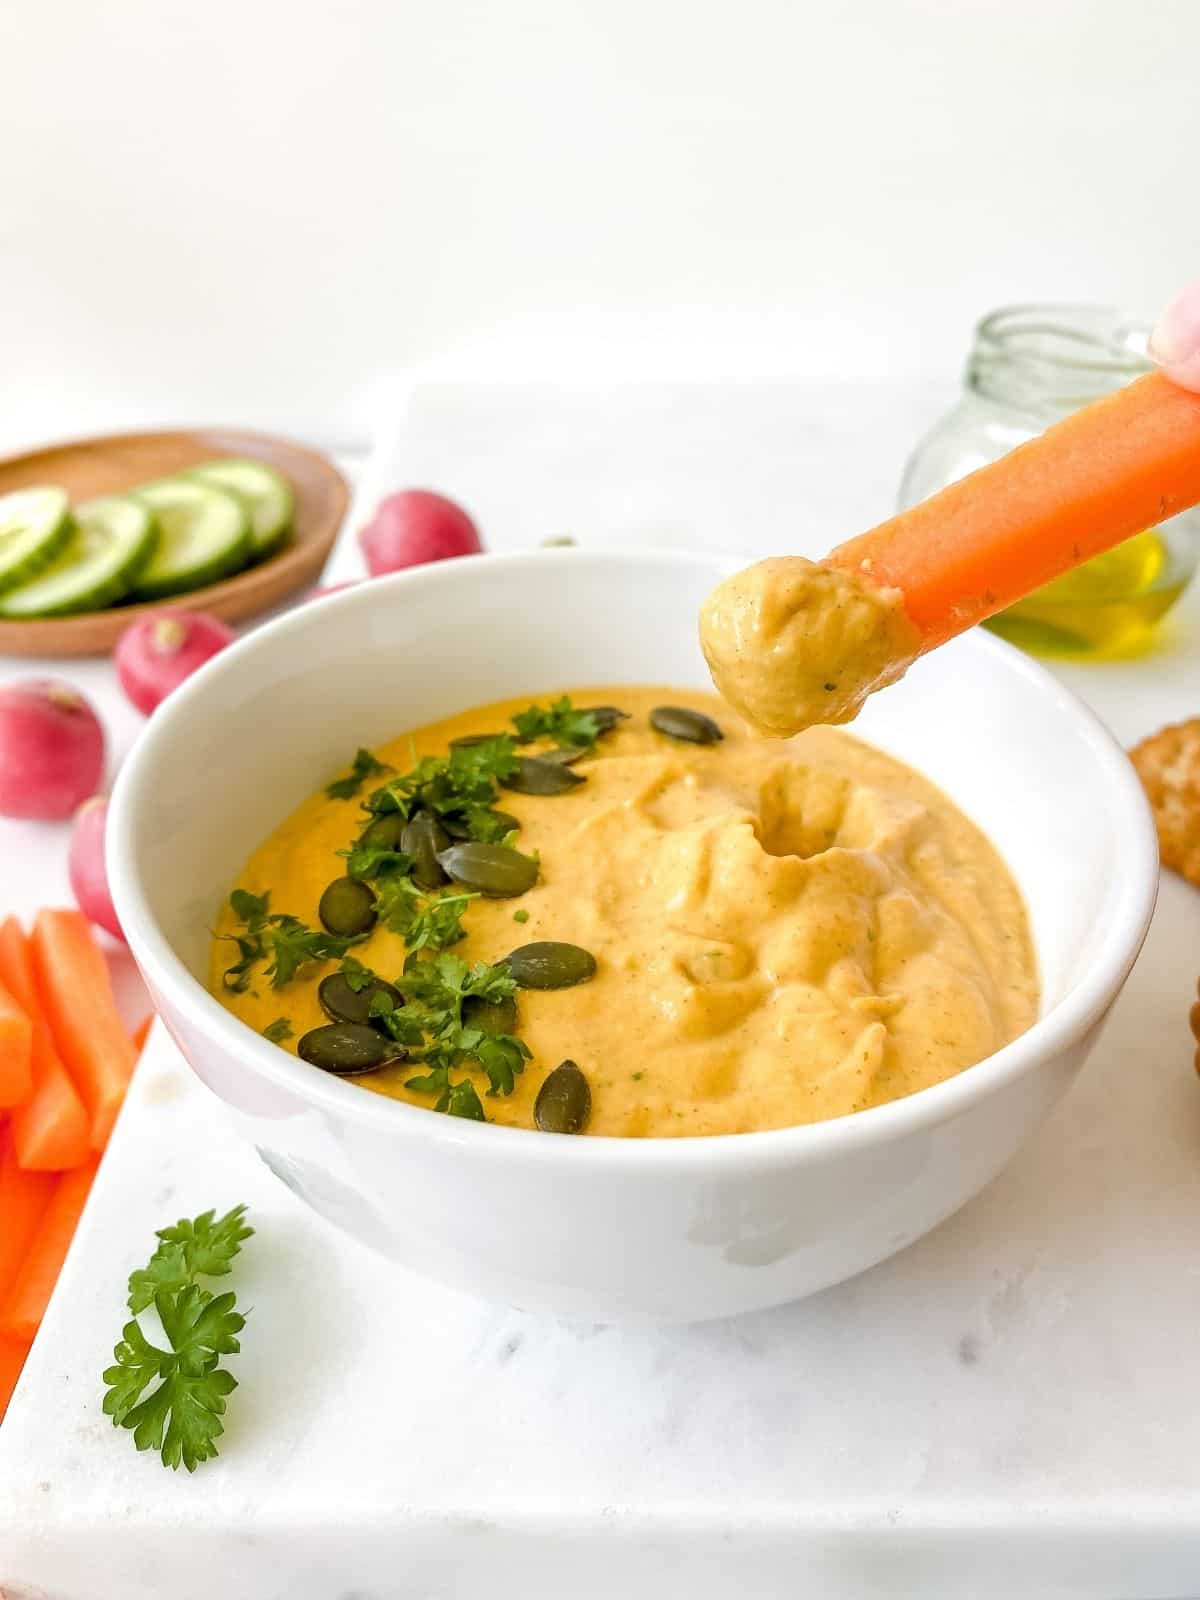 spicy zucchini baba ganoush with someone dipping a carrot stick into the bowl.